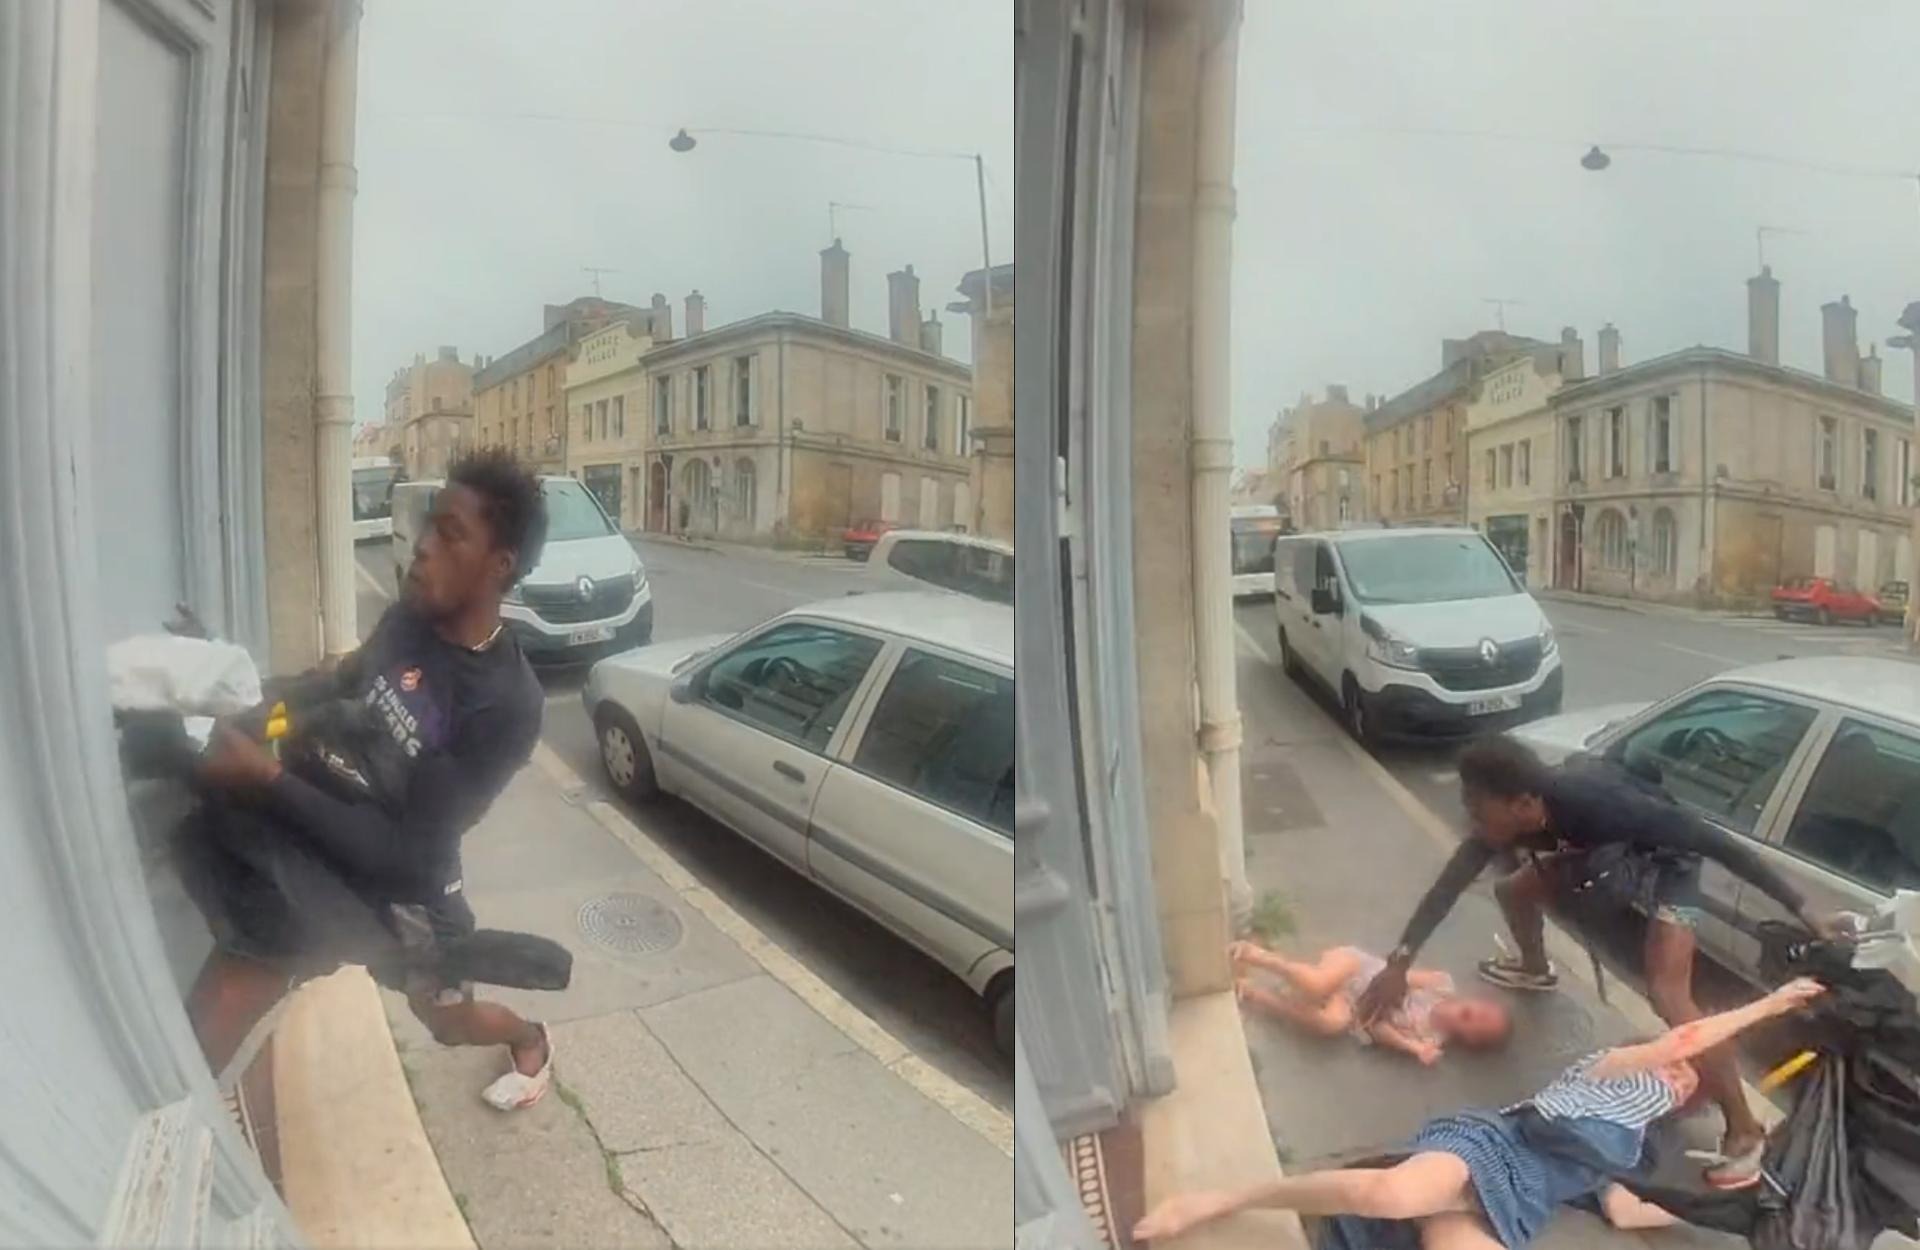 Meeting The New Caretaker Porn - FRANCE: Shocking Footage Shows Man Attacking Little Girl and Caretaker On  Streets Of Bordeaux - The Publica